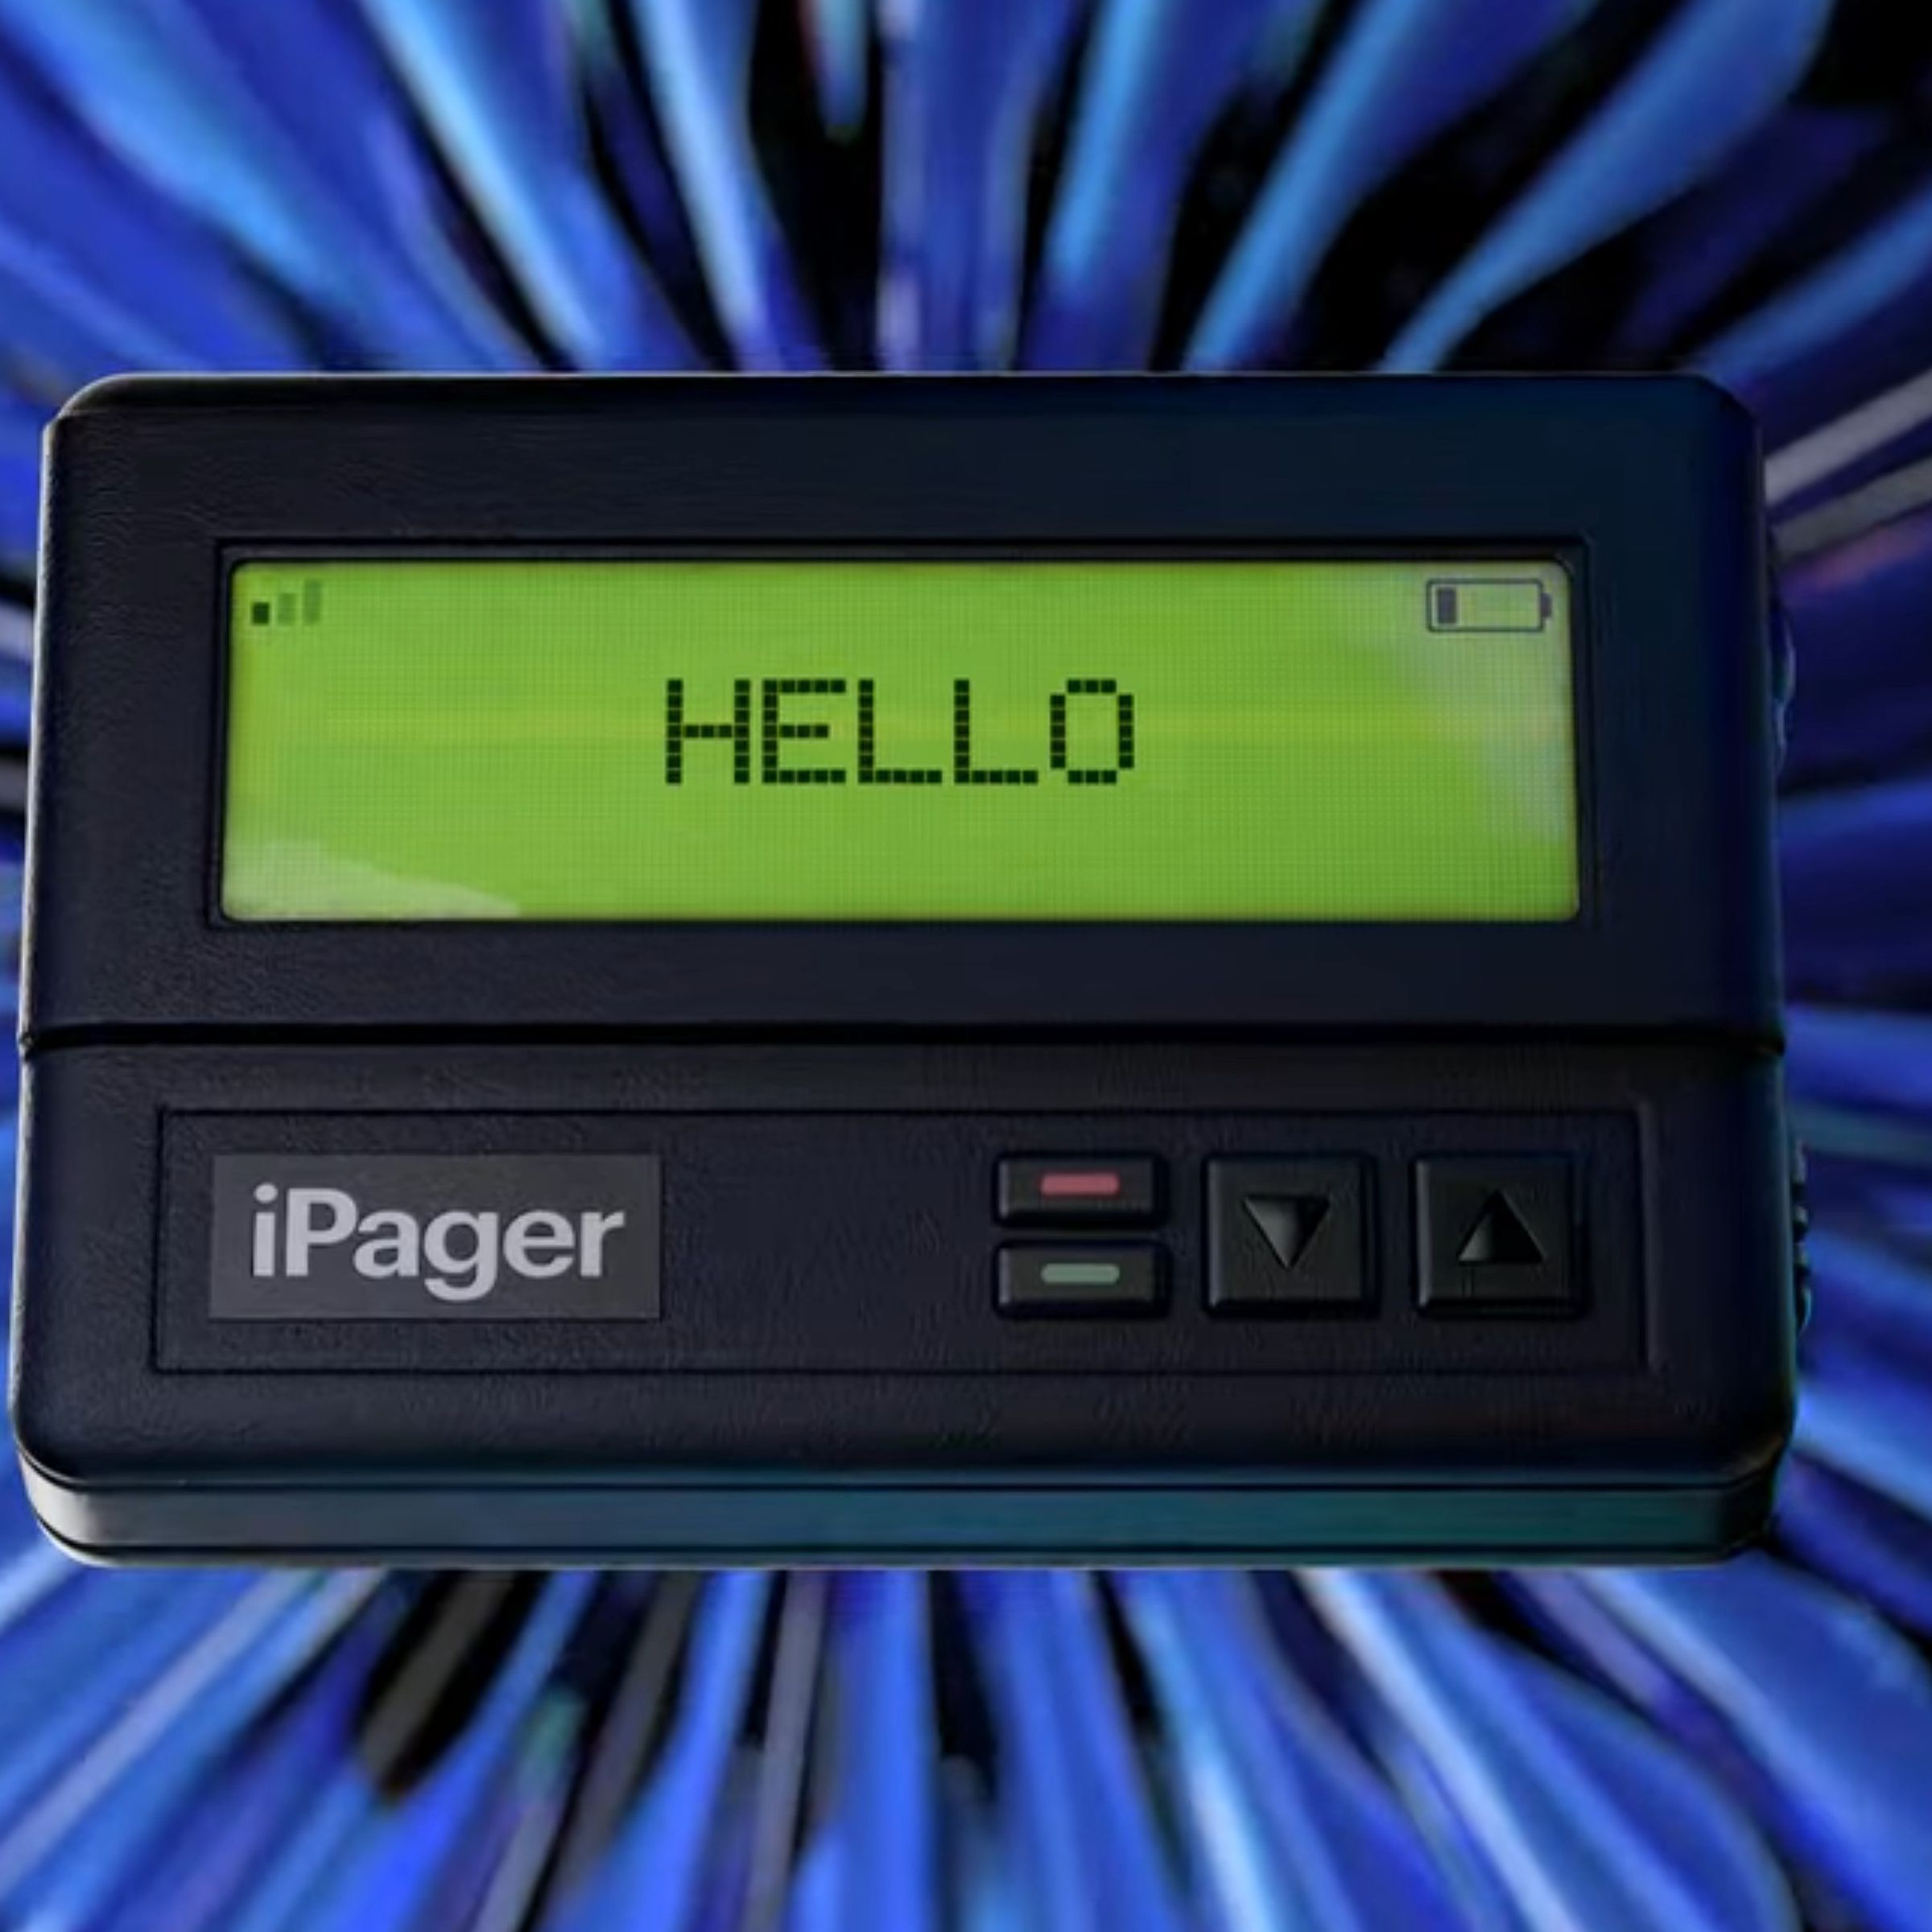 A screenshot of the fake iPager taken from Google’s latest Get The Message campaign update.